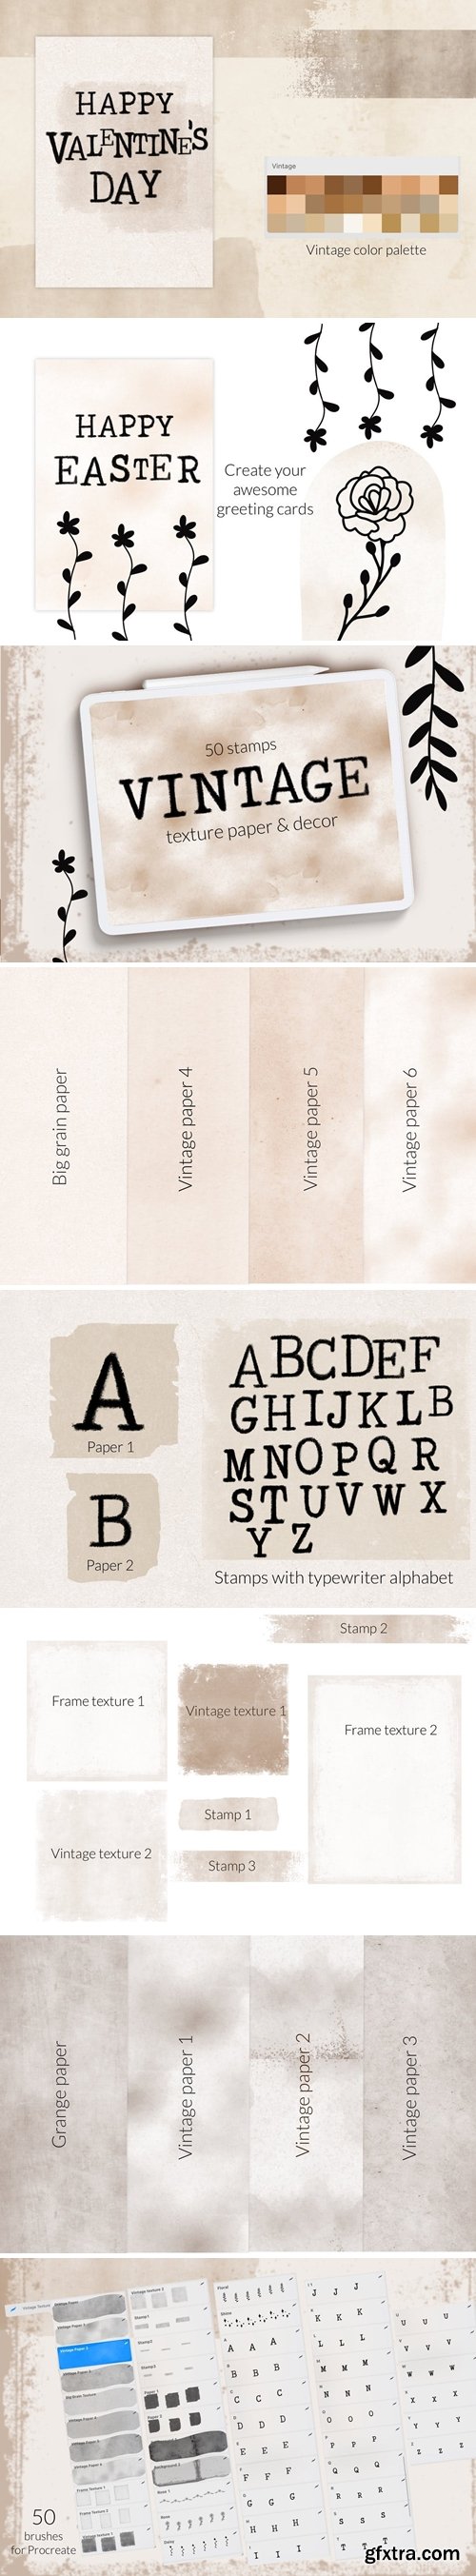 Vintage texture paper brushes. Typewriter letters